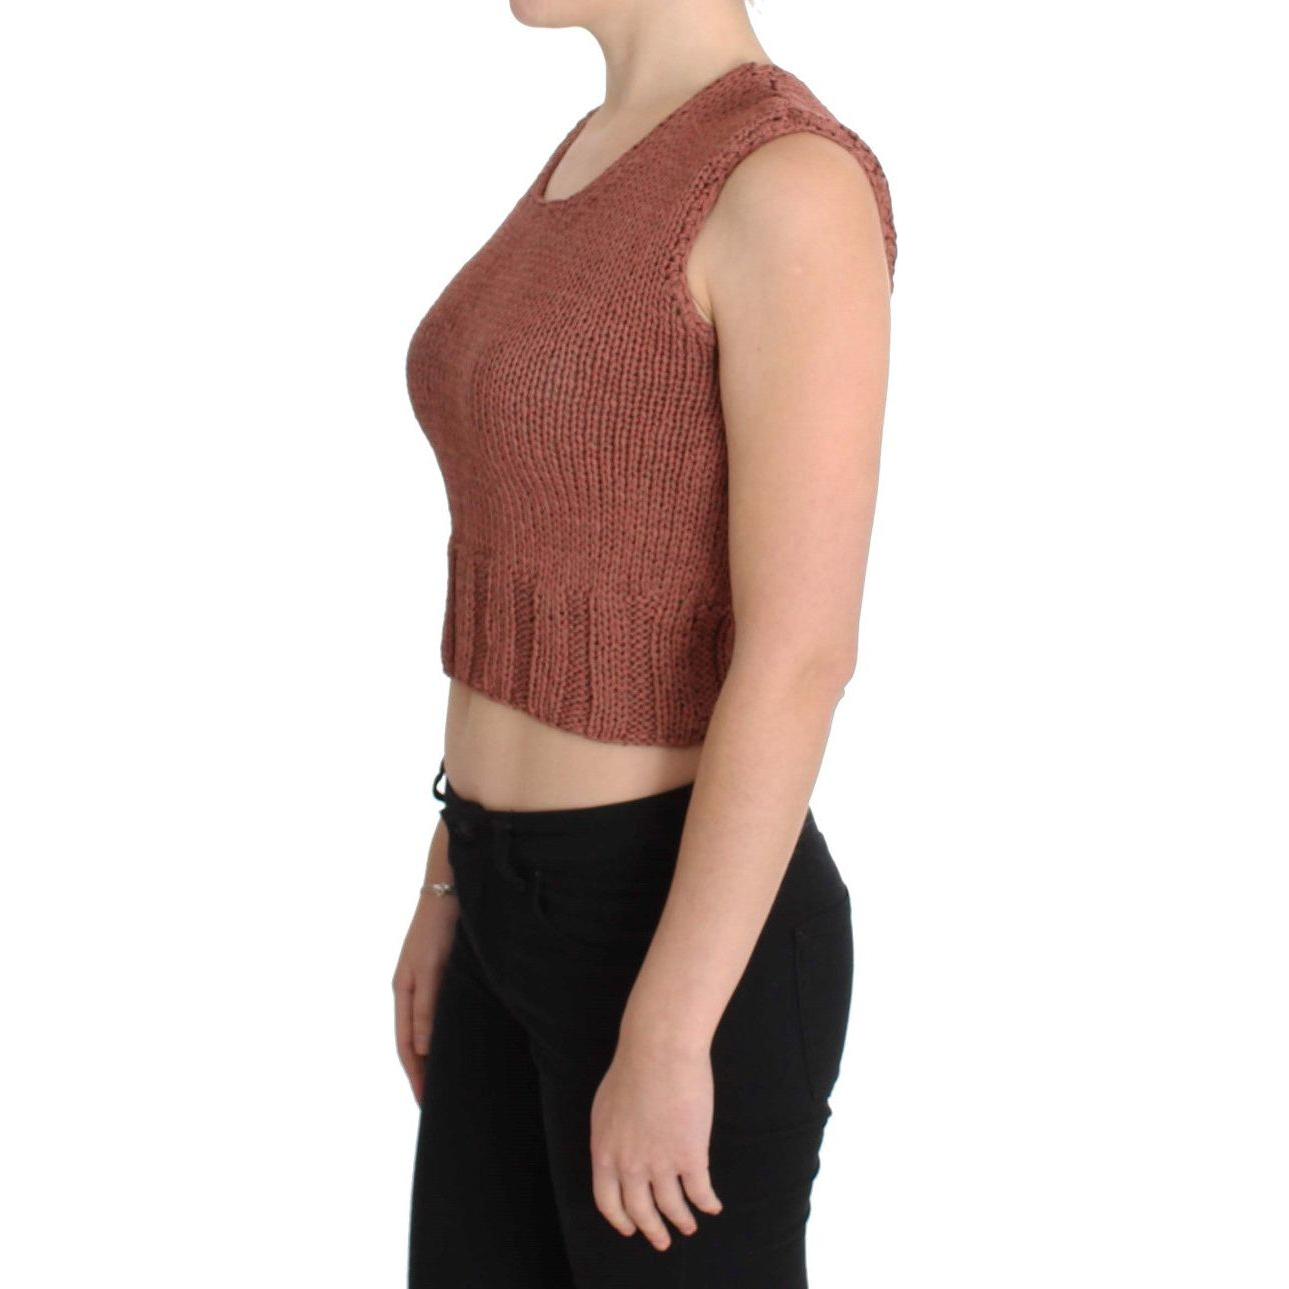 PINK MEMORIES Chic Red Sleeveless Knit Vest Sweater red-cotton-blend-knitted-sleeveless-sweater